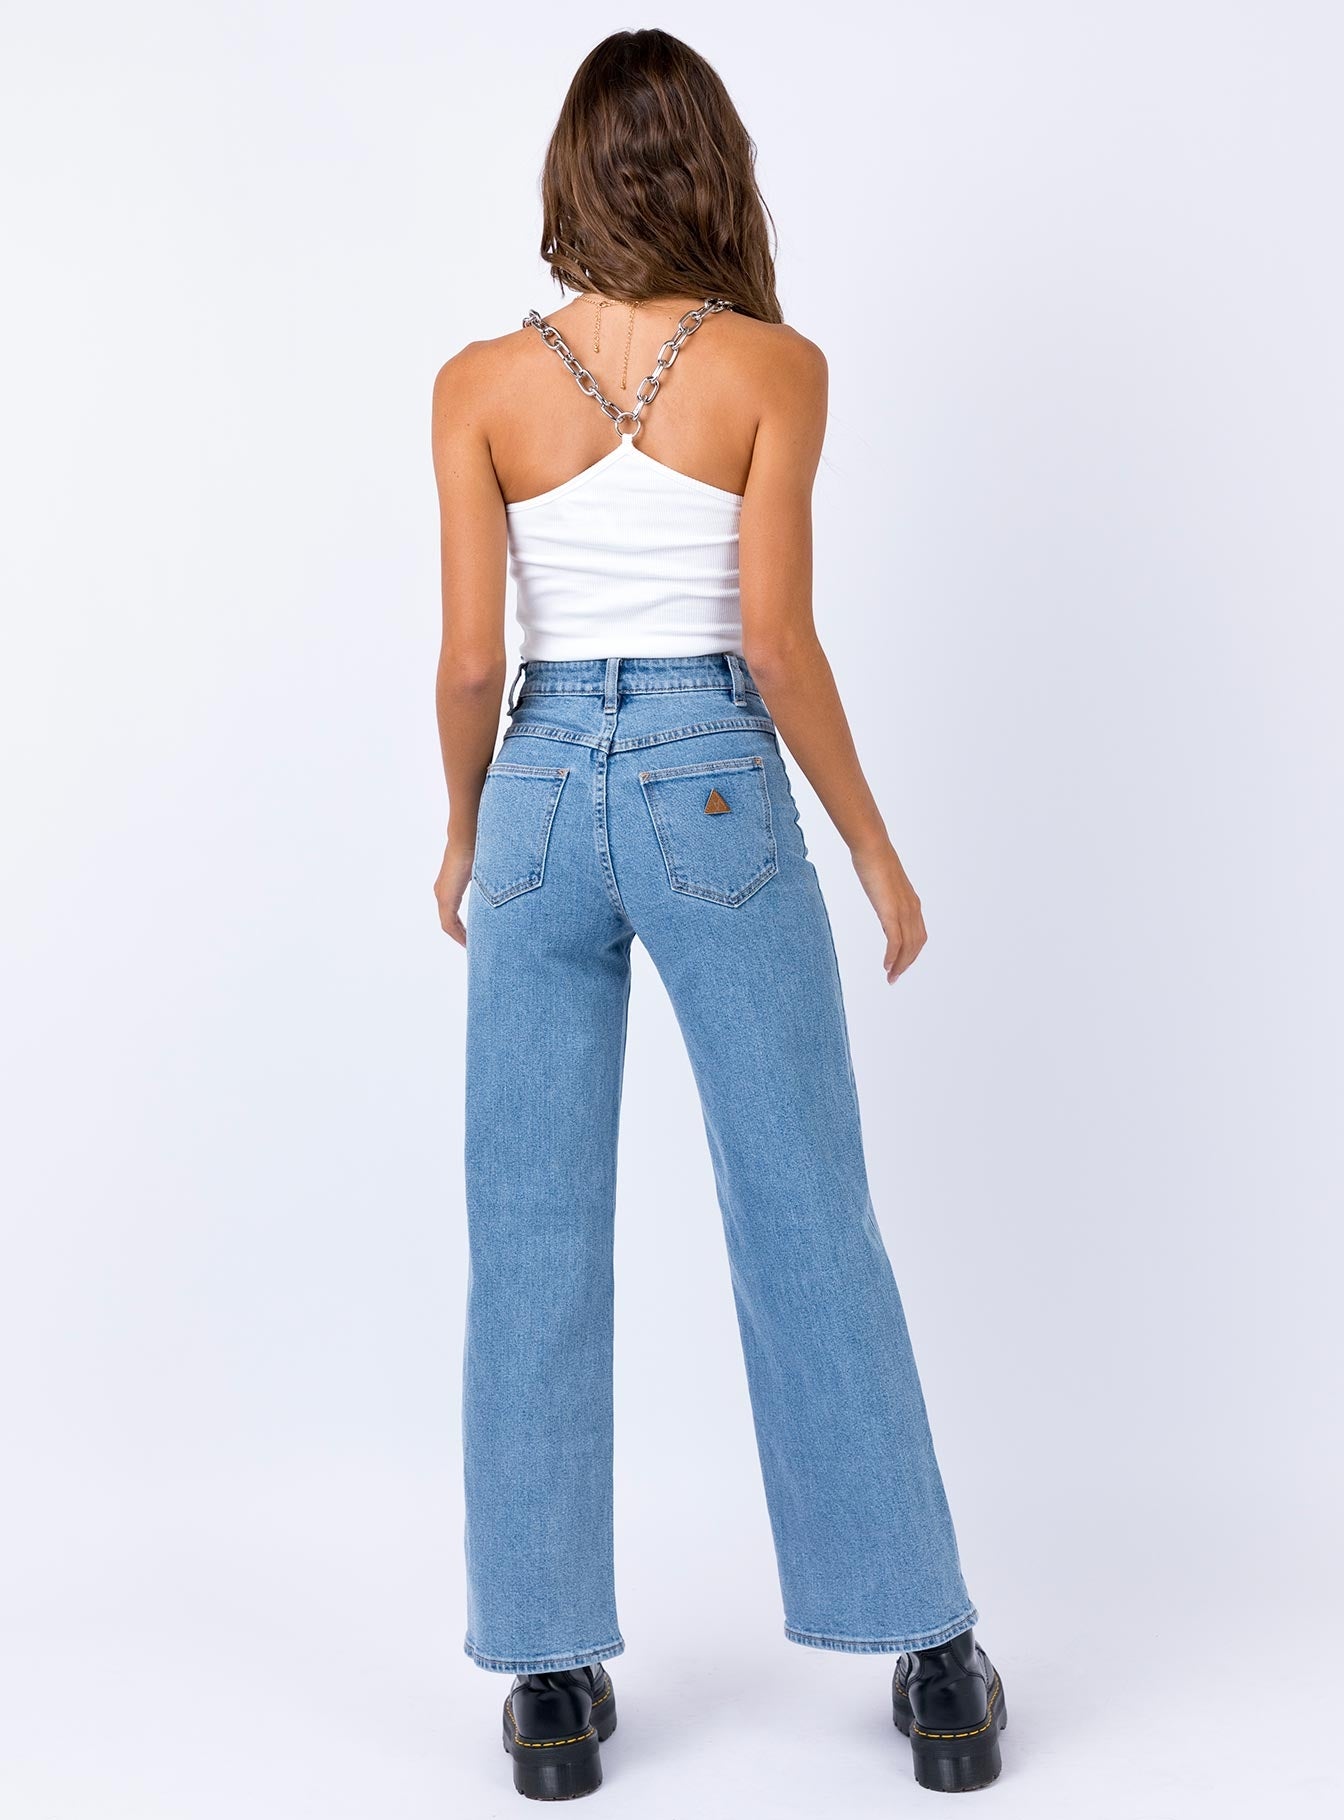 abrand jeans